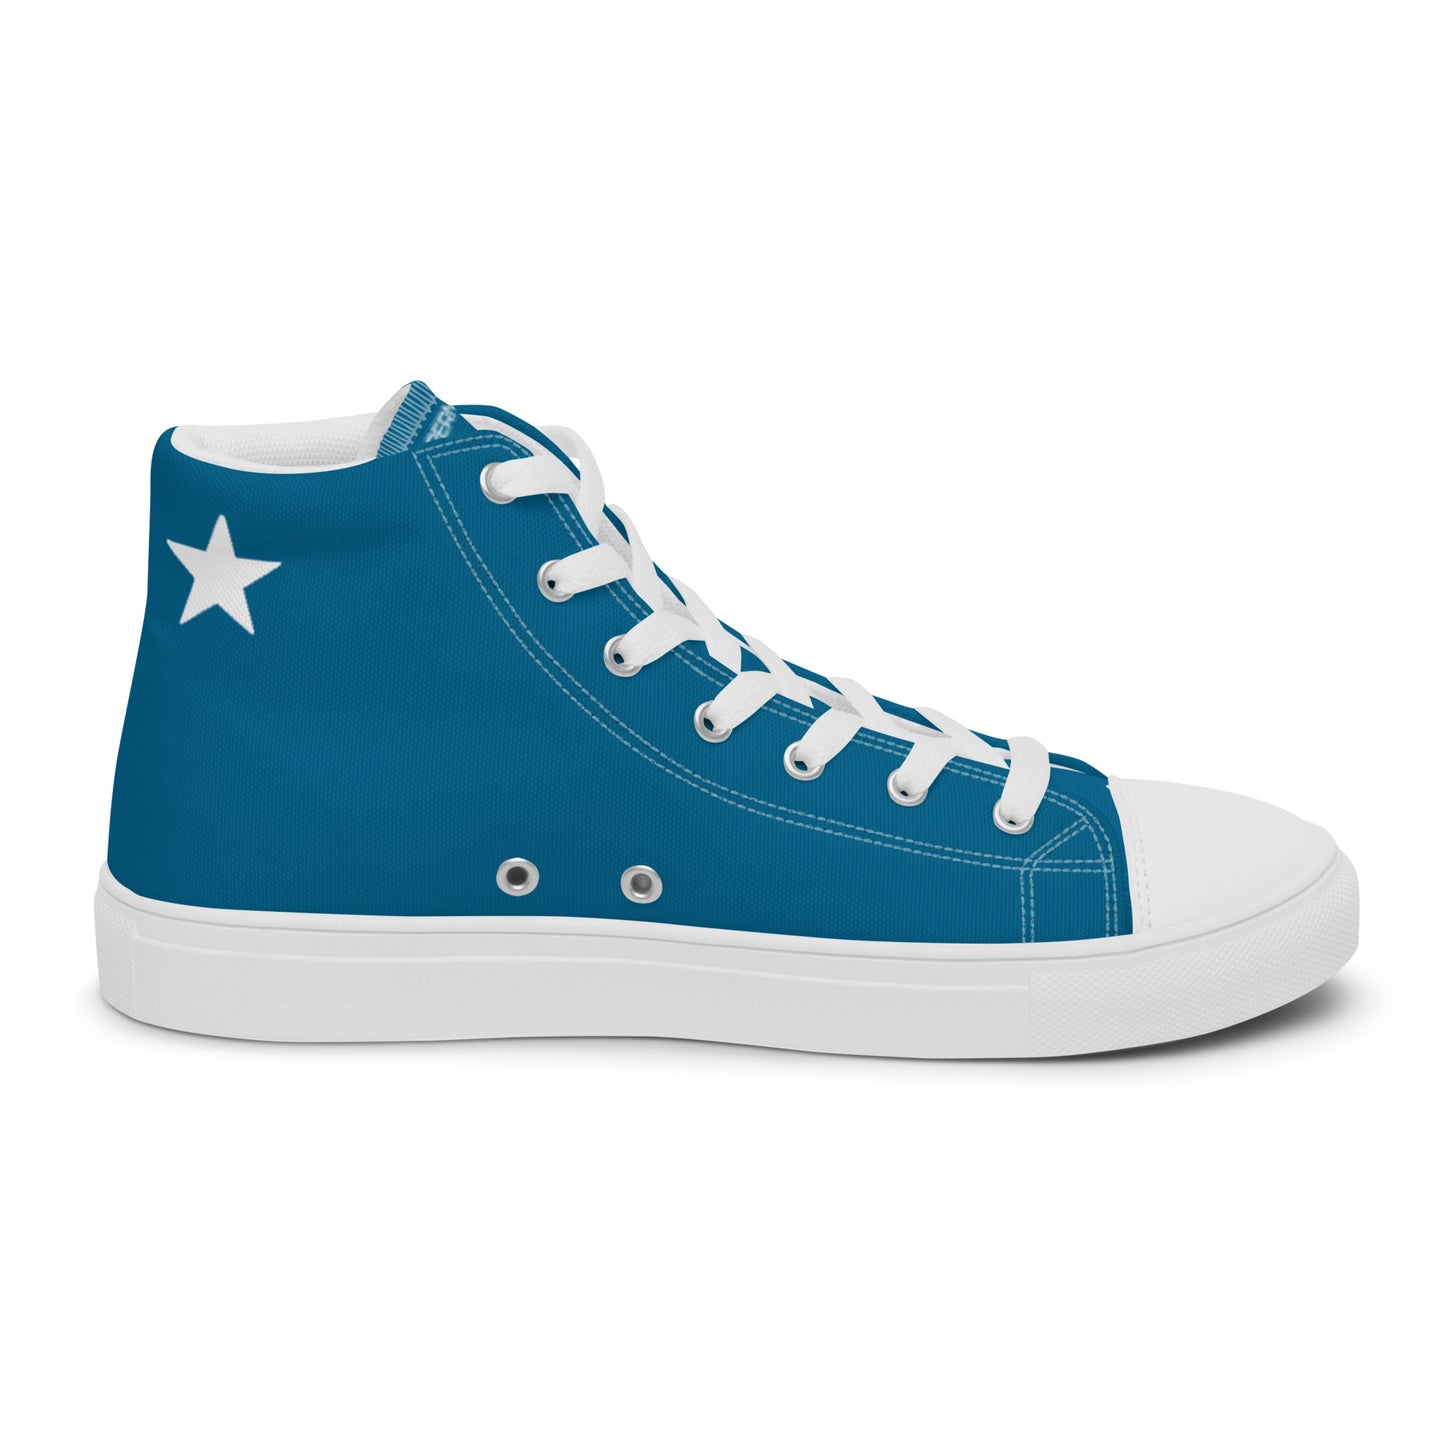 Men’s high top canvas shoes Solid1